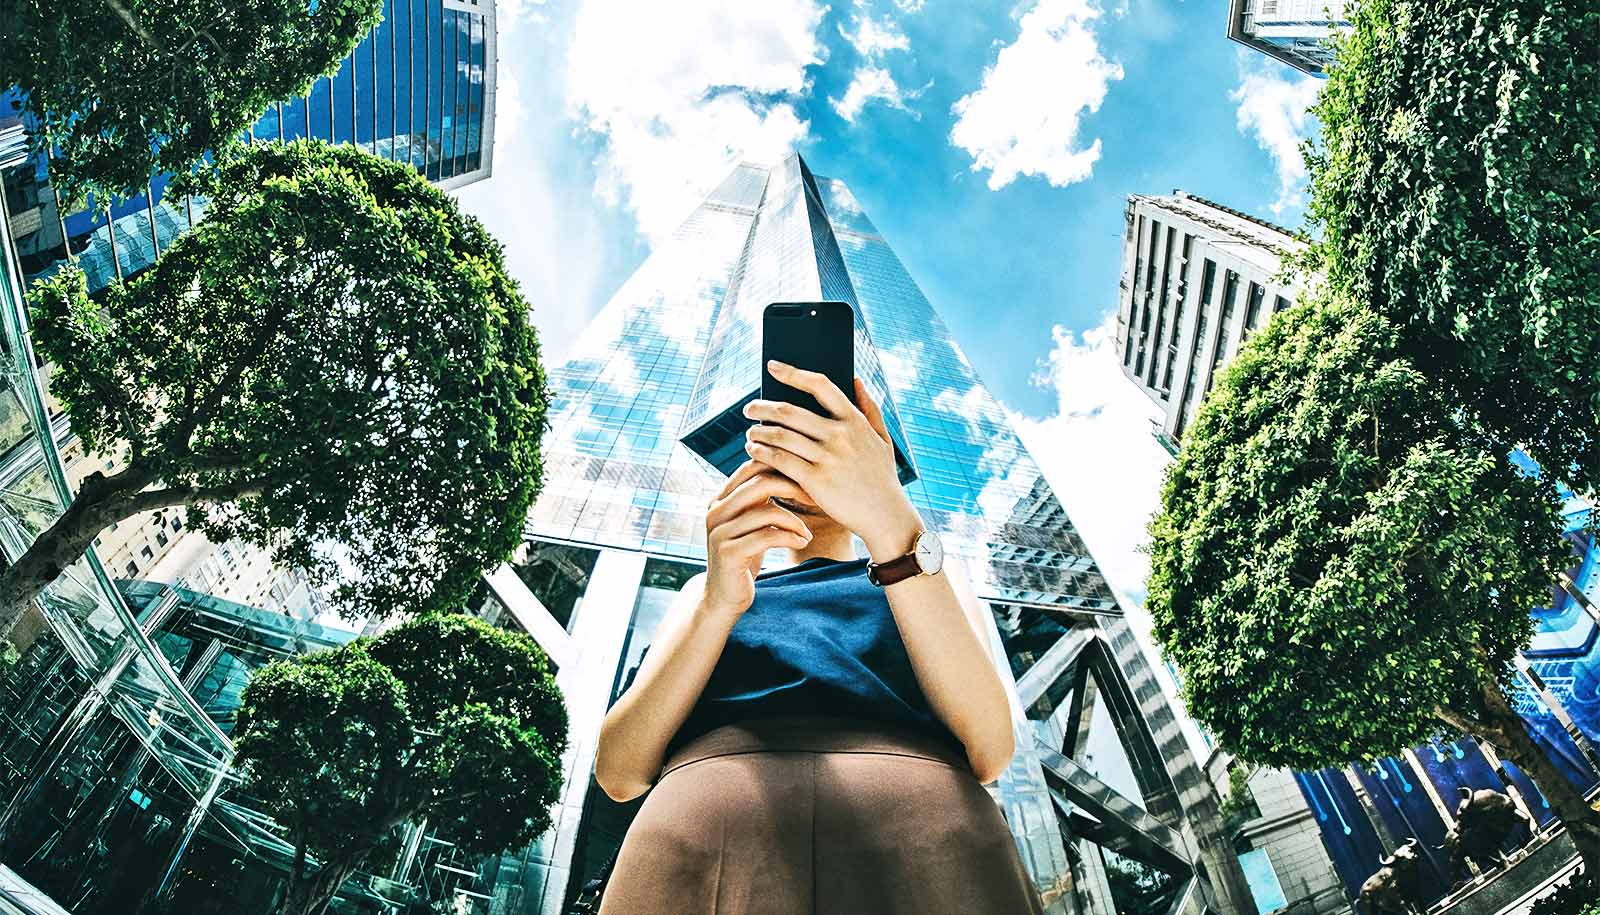 A woman looks down at her phone as trees and buildings tower over her in the background.